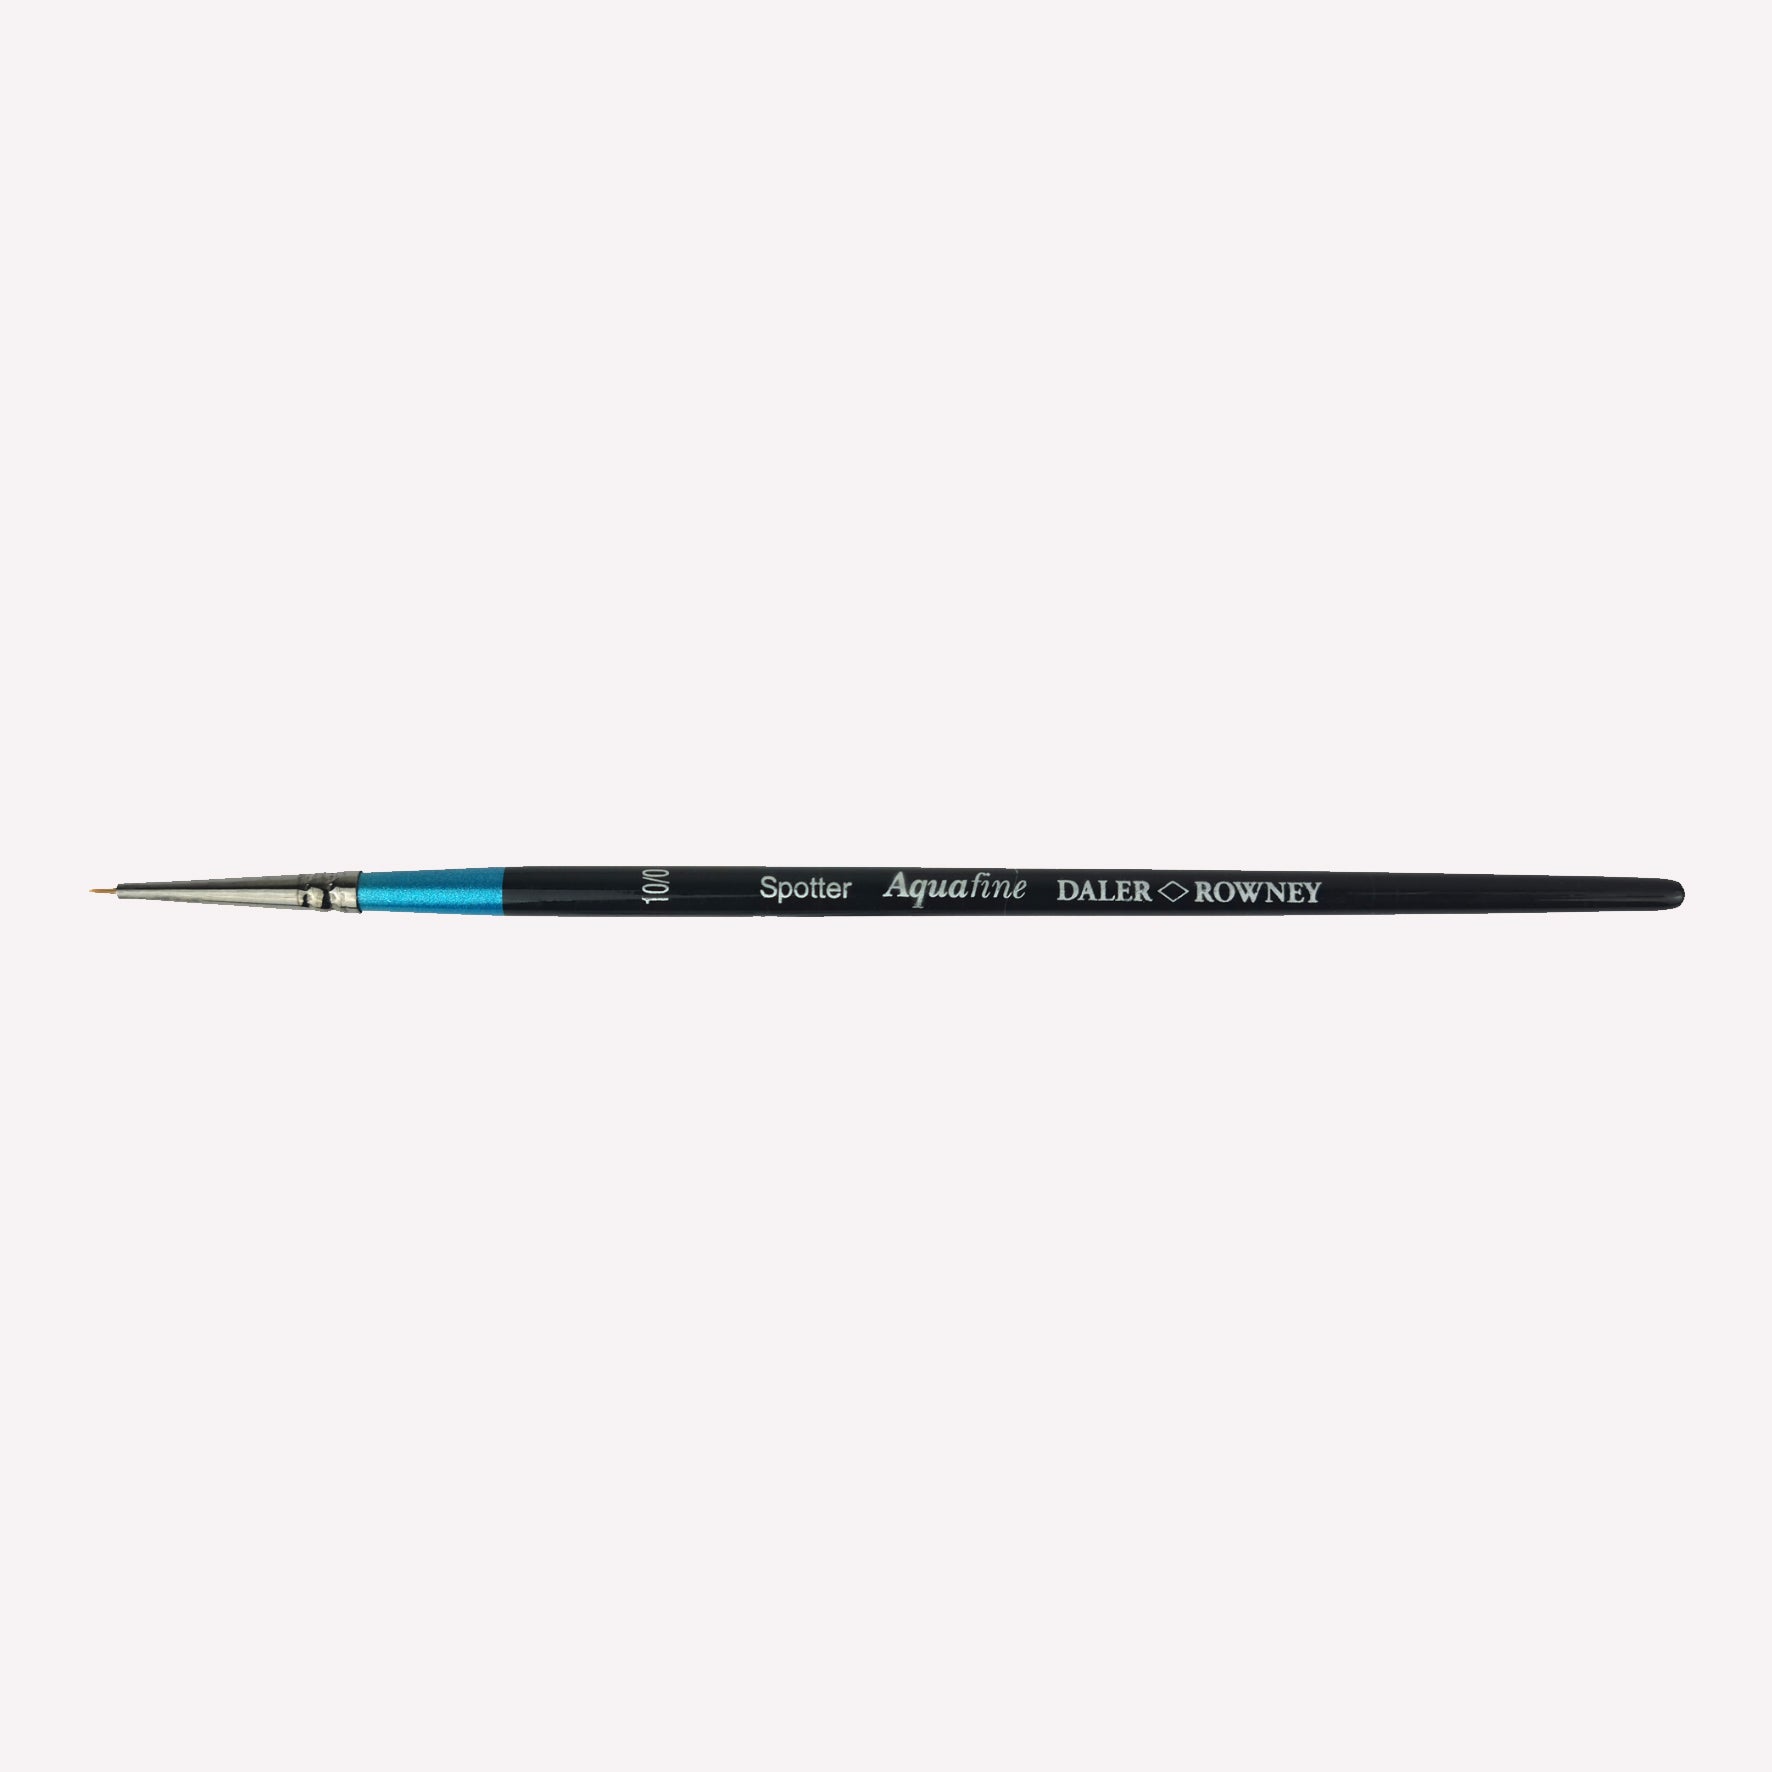 Daler Rowney Aquafine Spotter paintbrush in size 10/0. The short precision brush allows for precise control while painting with watercolour. Brushes have a classy black handle with blue detailing and a silver ferrule.